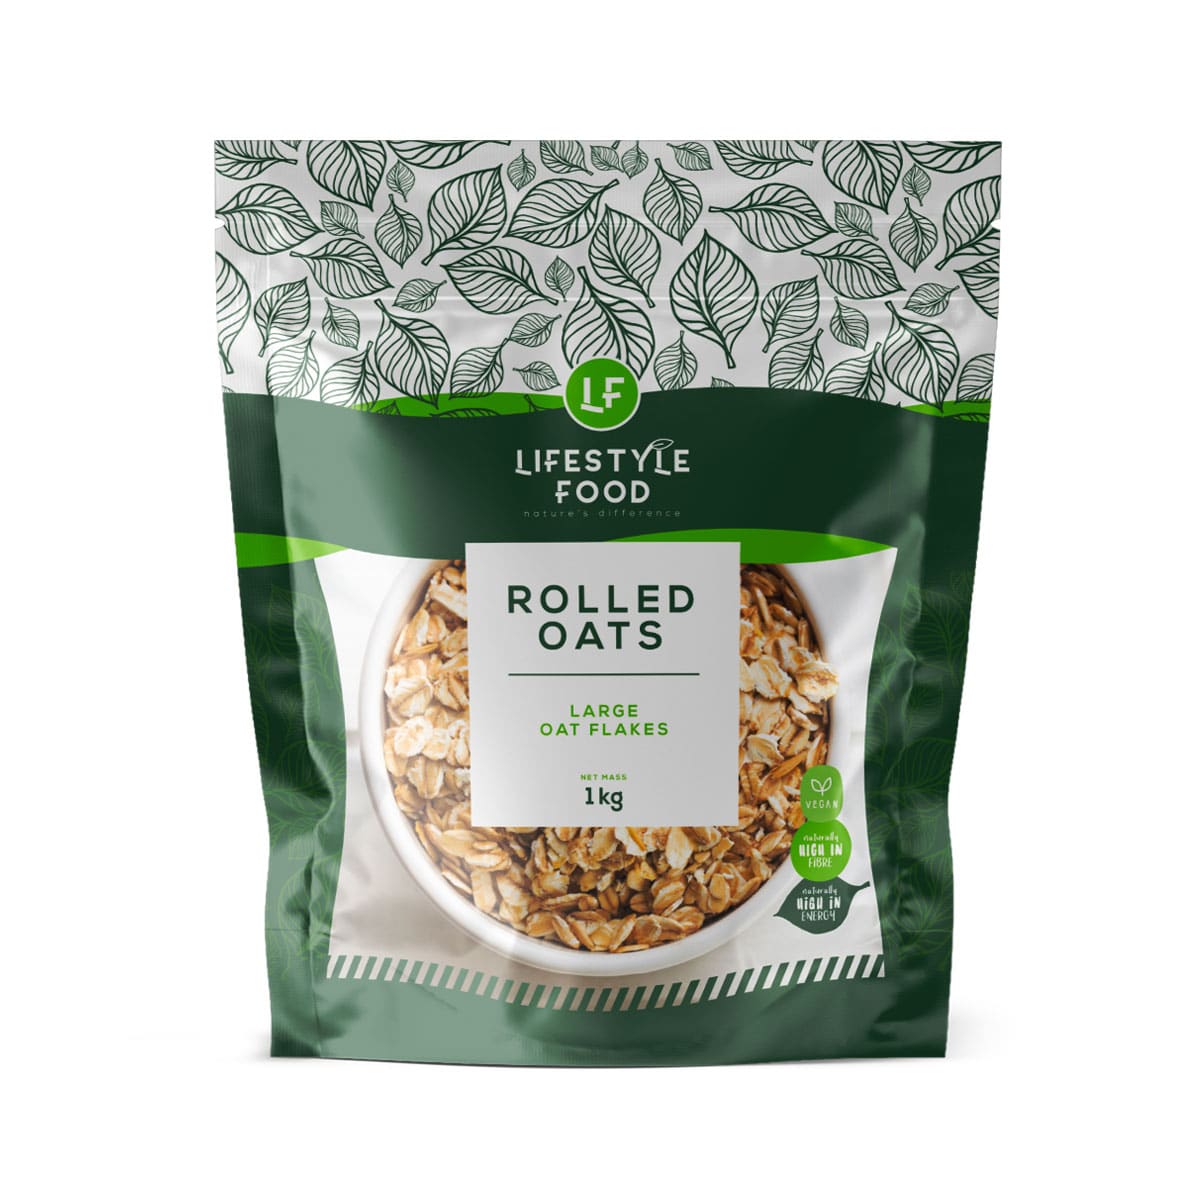 Lifestyle Food Rolled Oats Large - 1kg